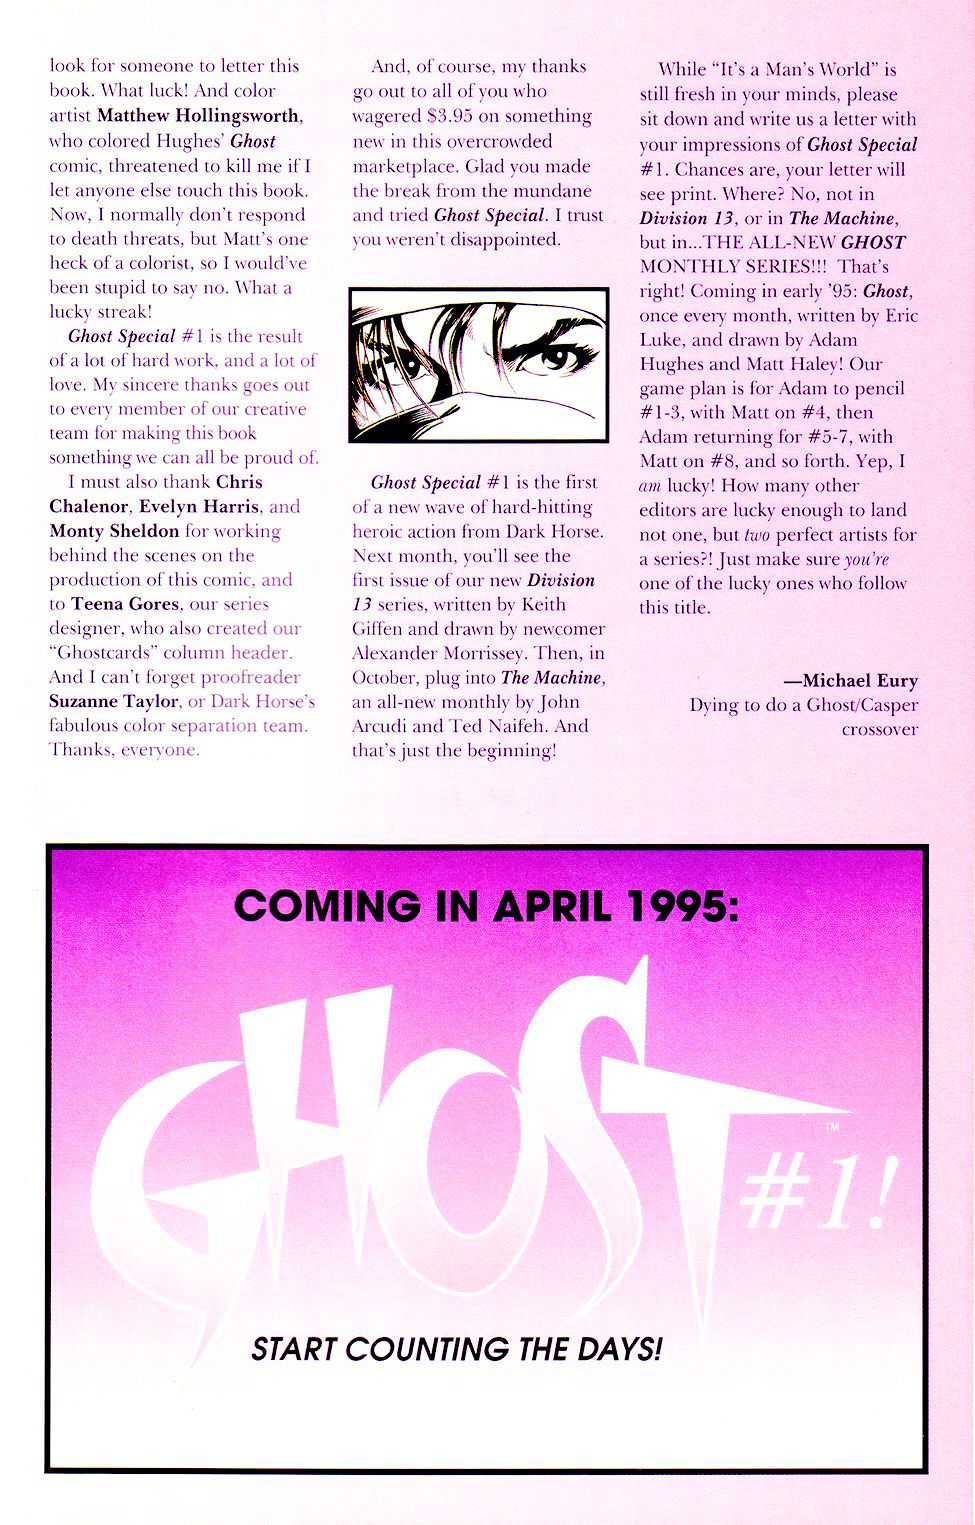 Read online Ghost Special comic -  Issue #1 - 38